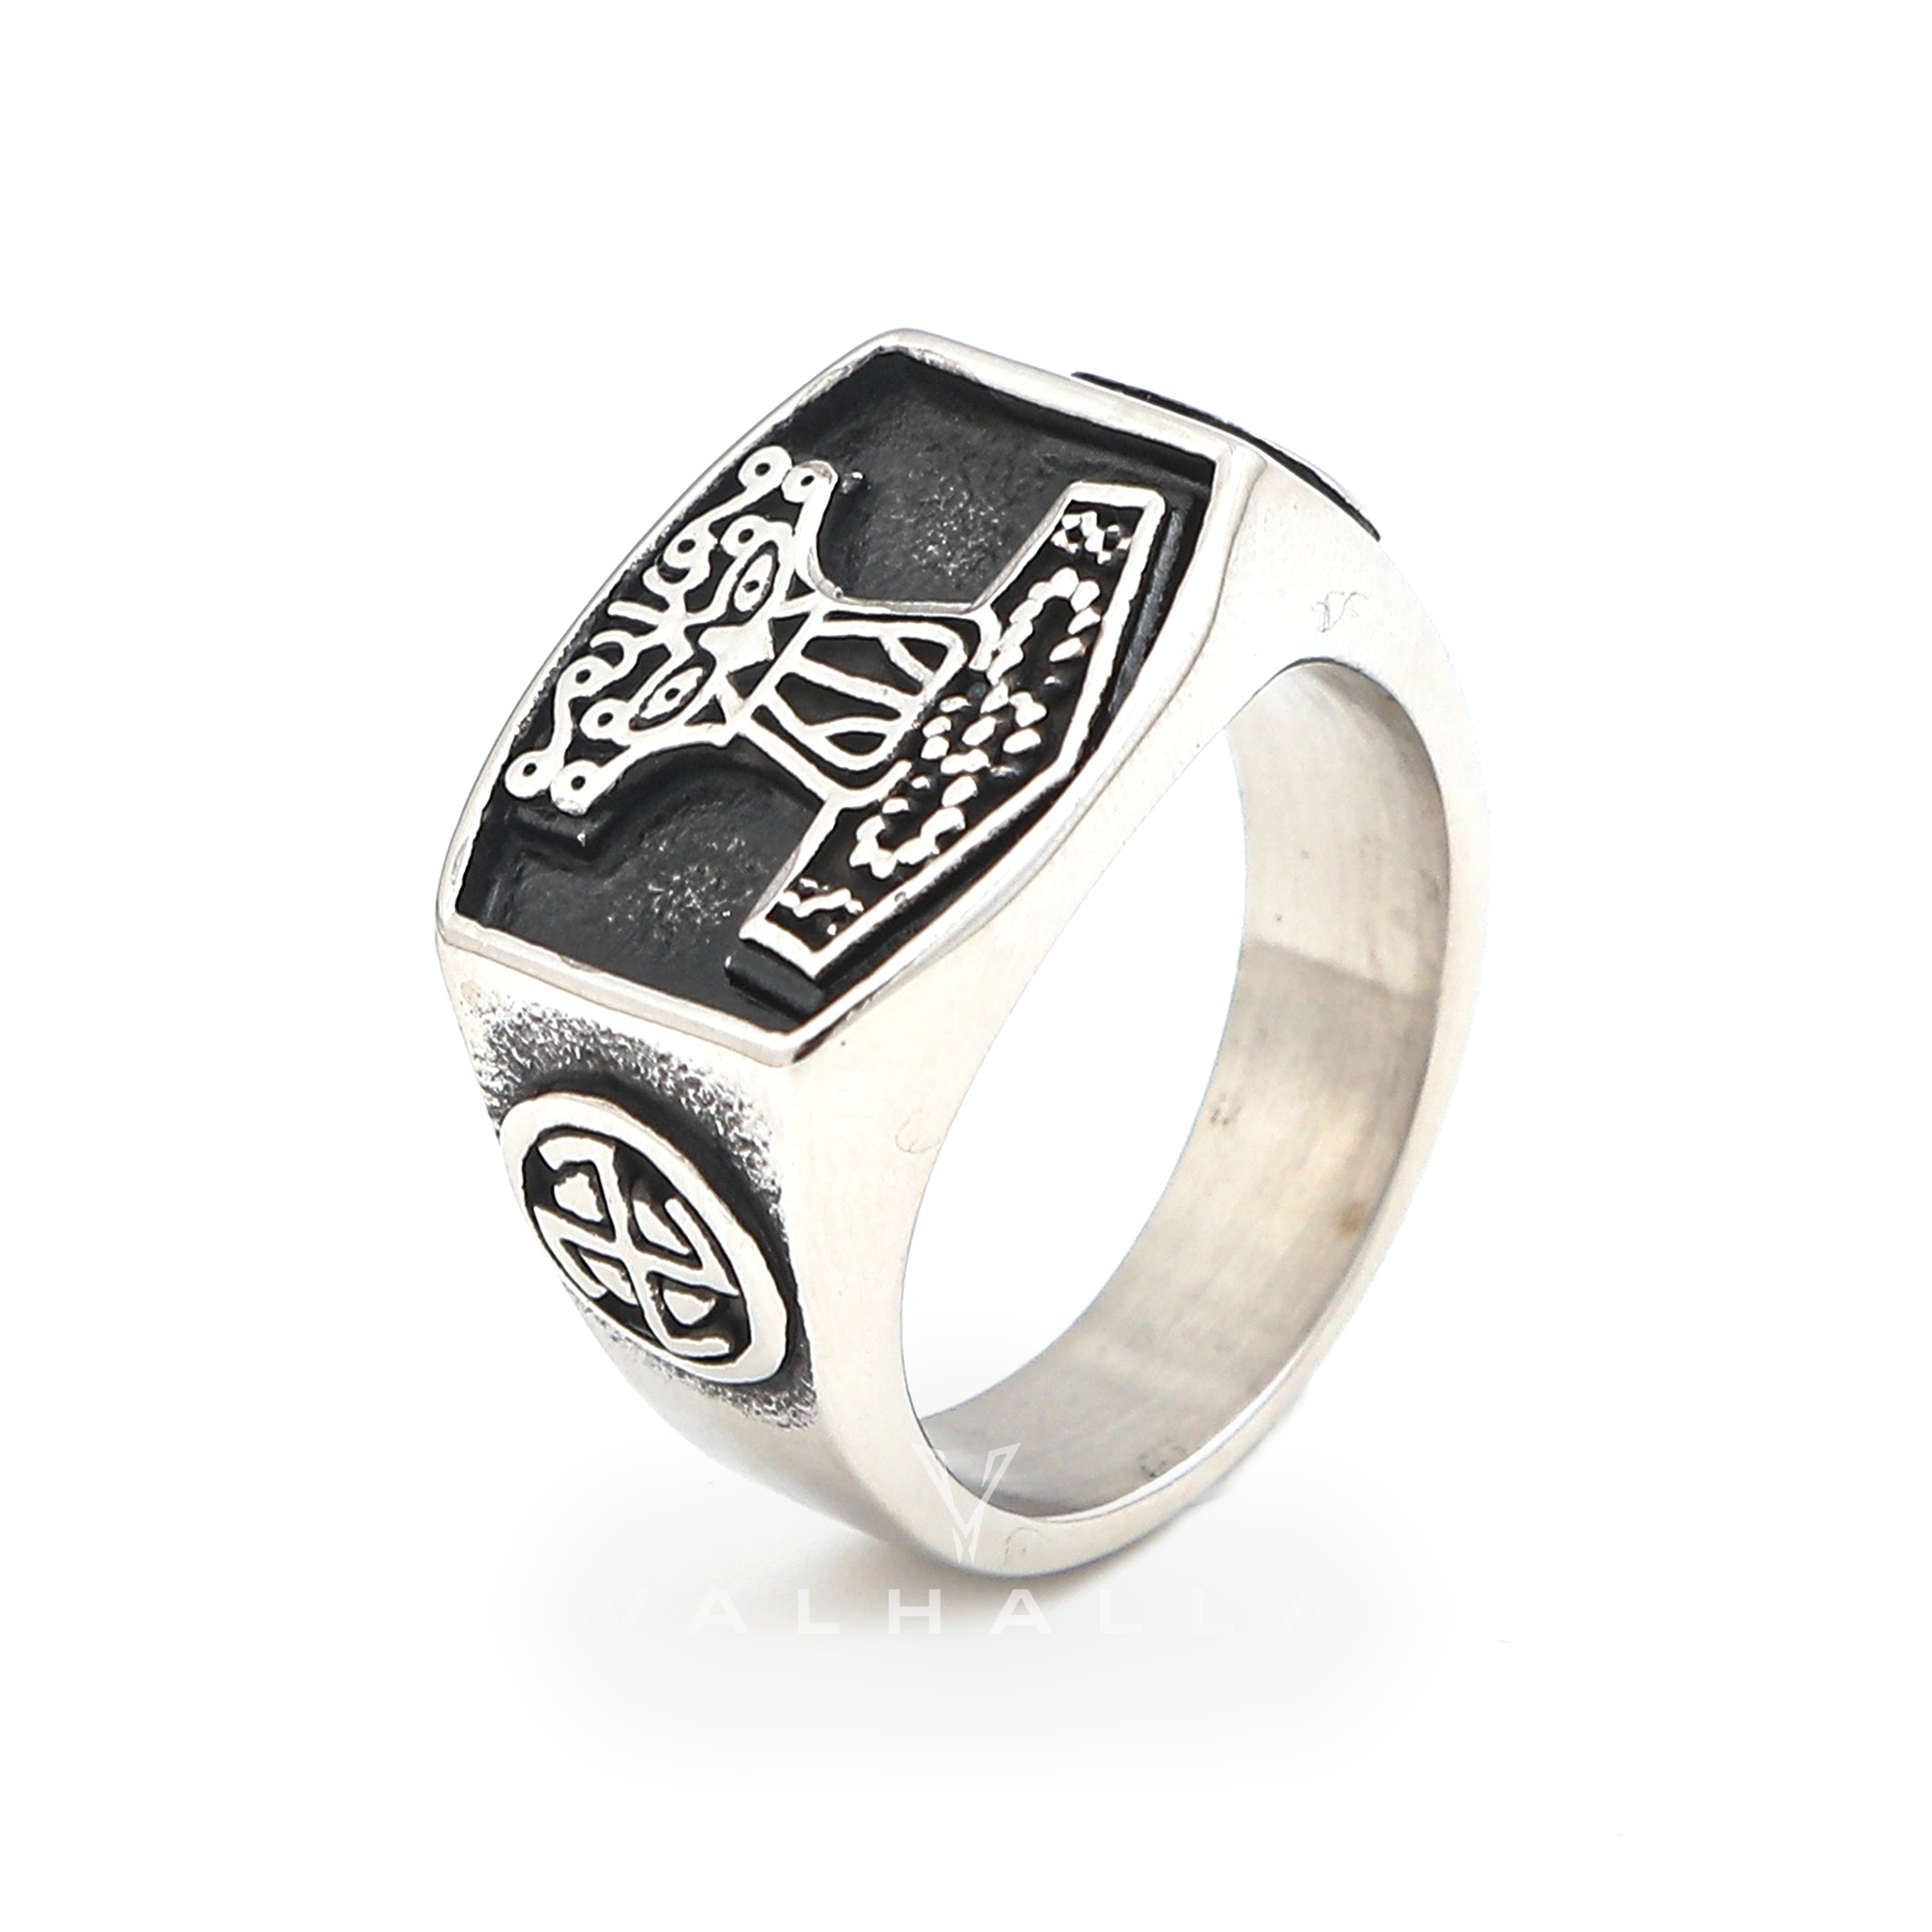 Handcrafted Stainless Steel 'Aged' Mjolnir Signet Ring